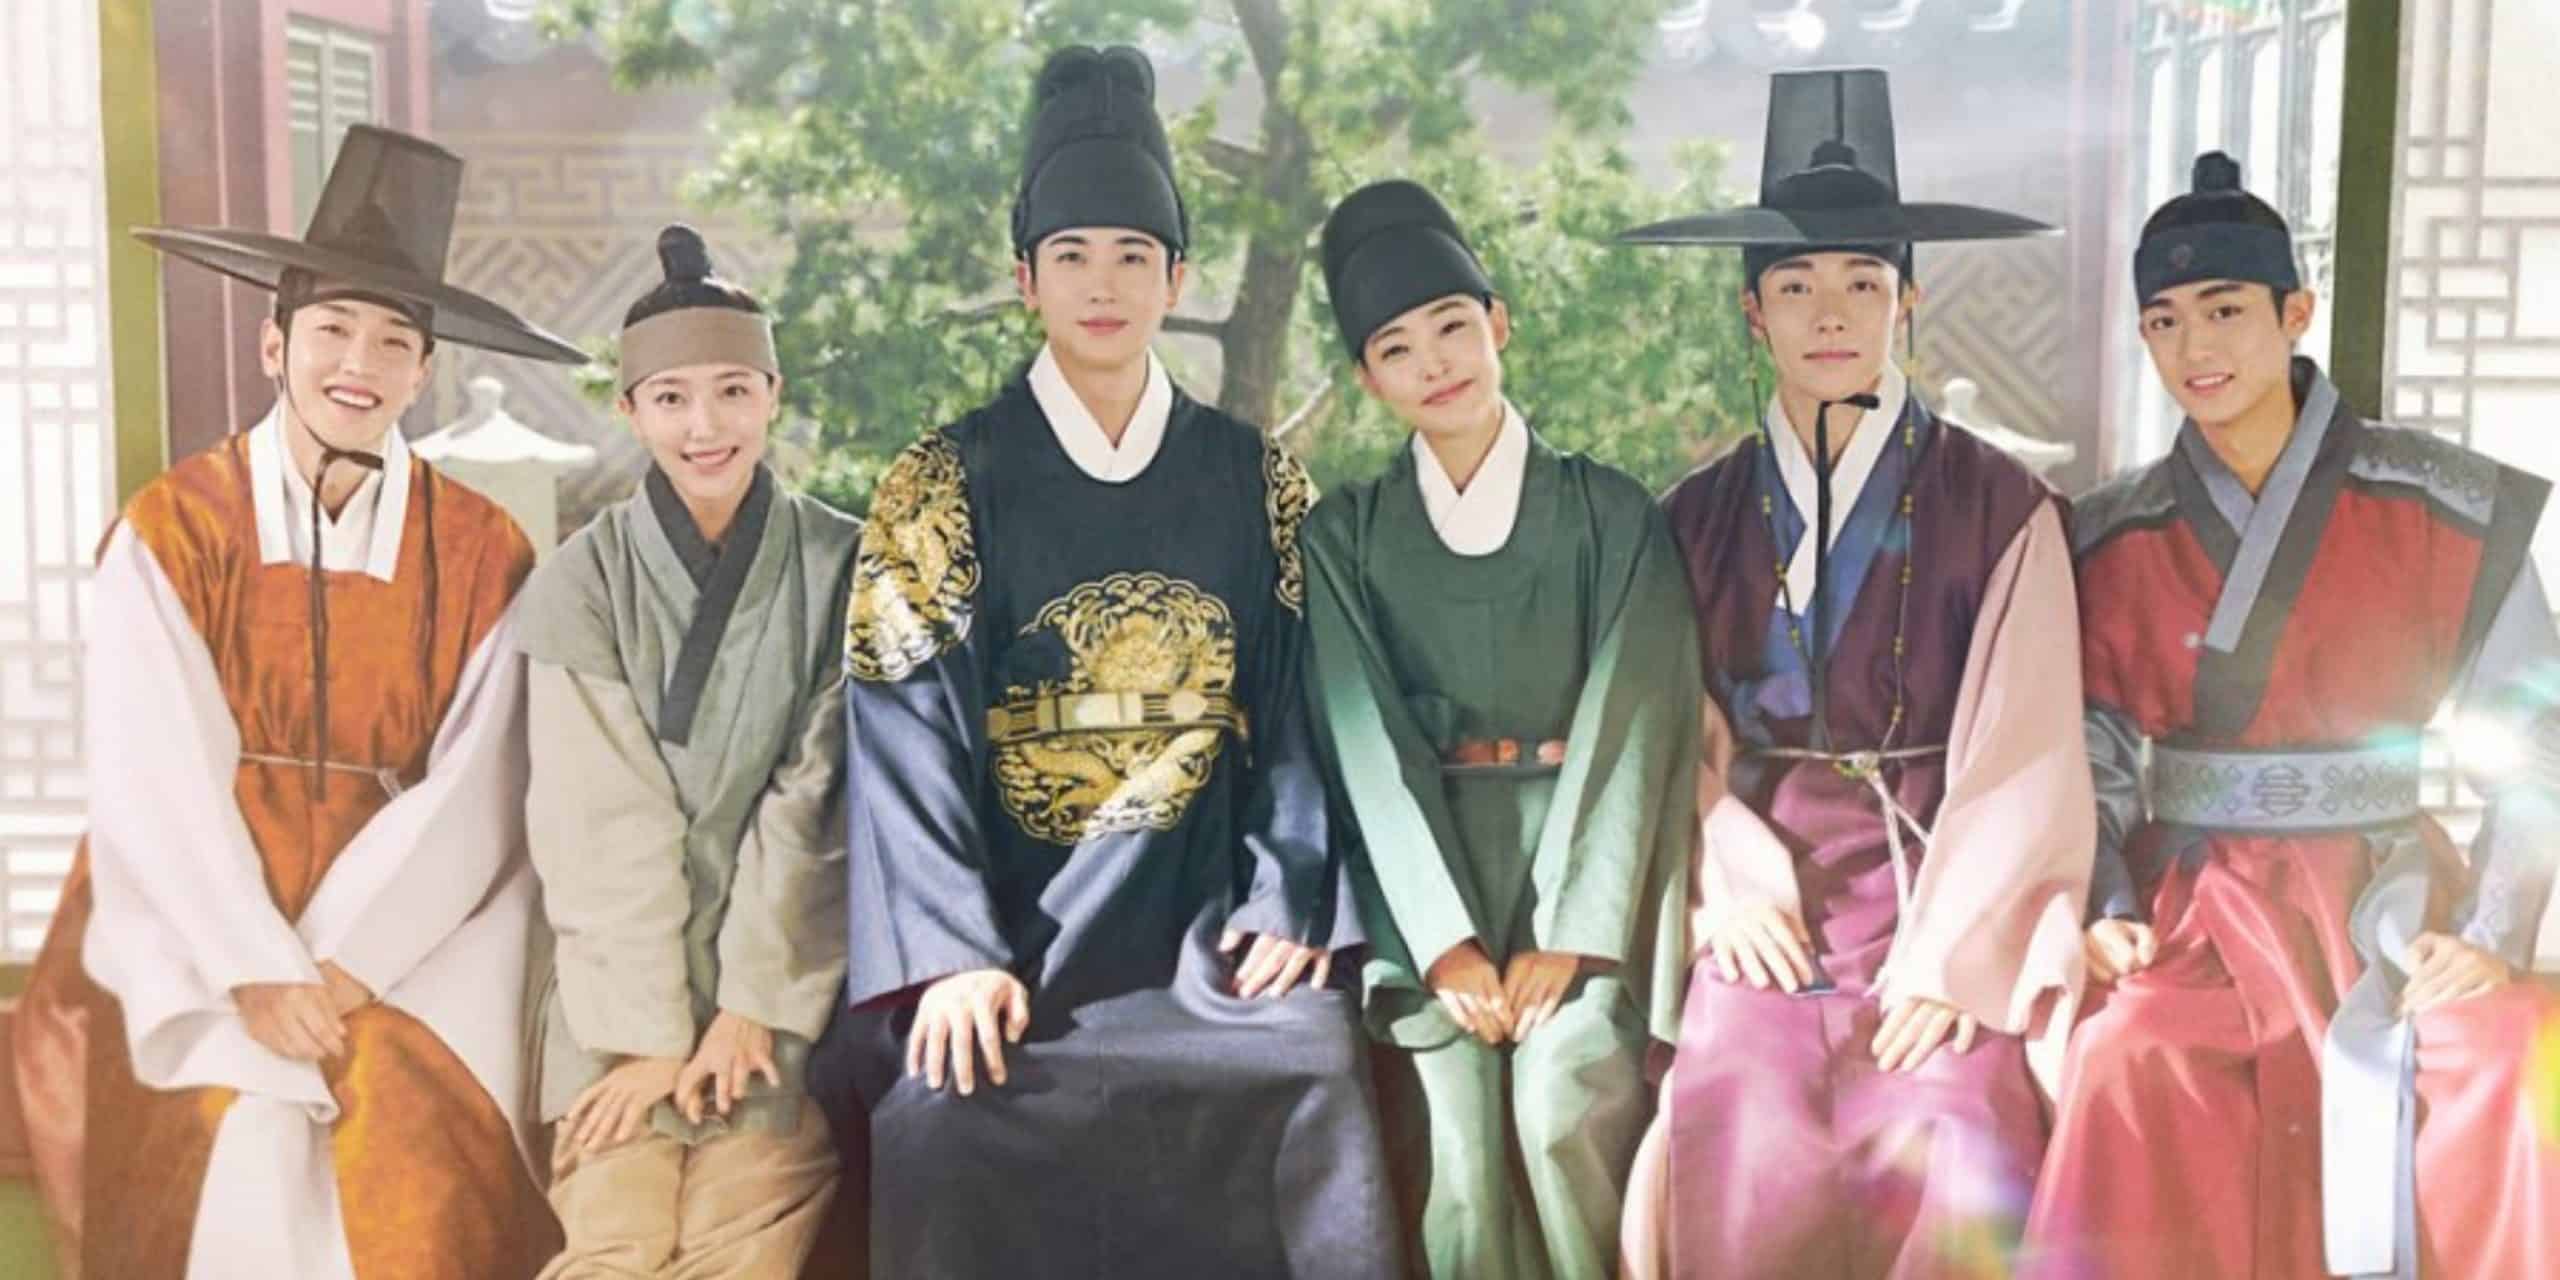 Our Blooming Youth Historical K-drama Episode 14 Synopsis